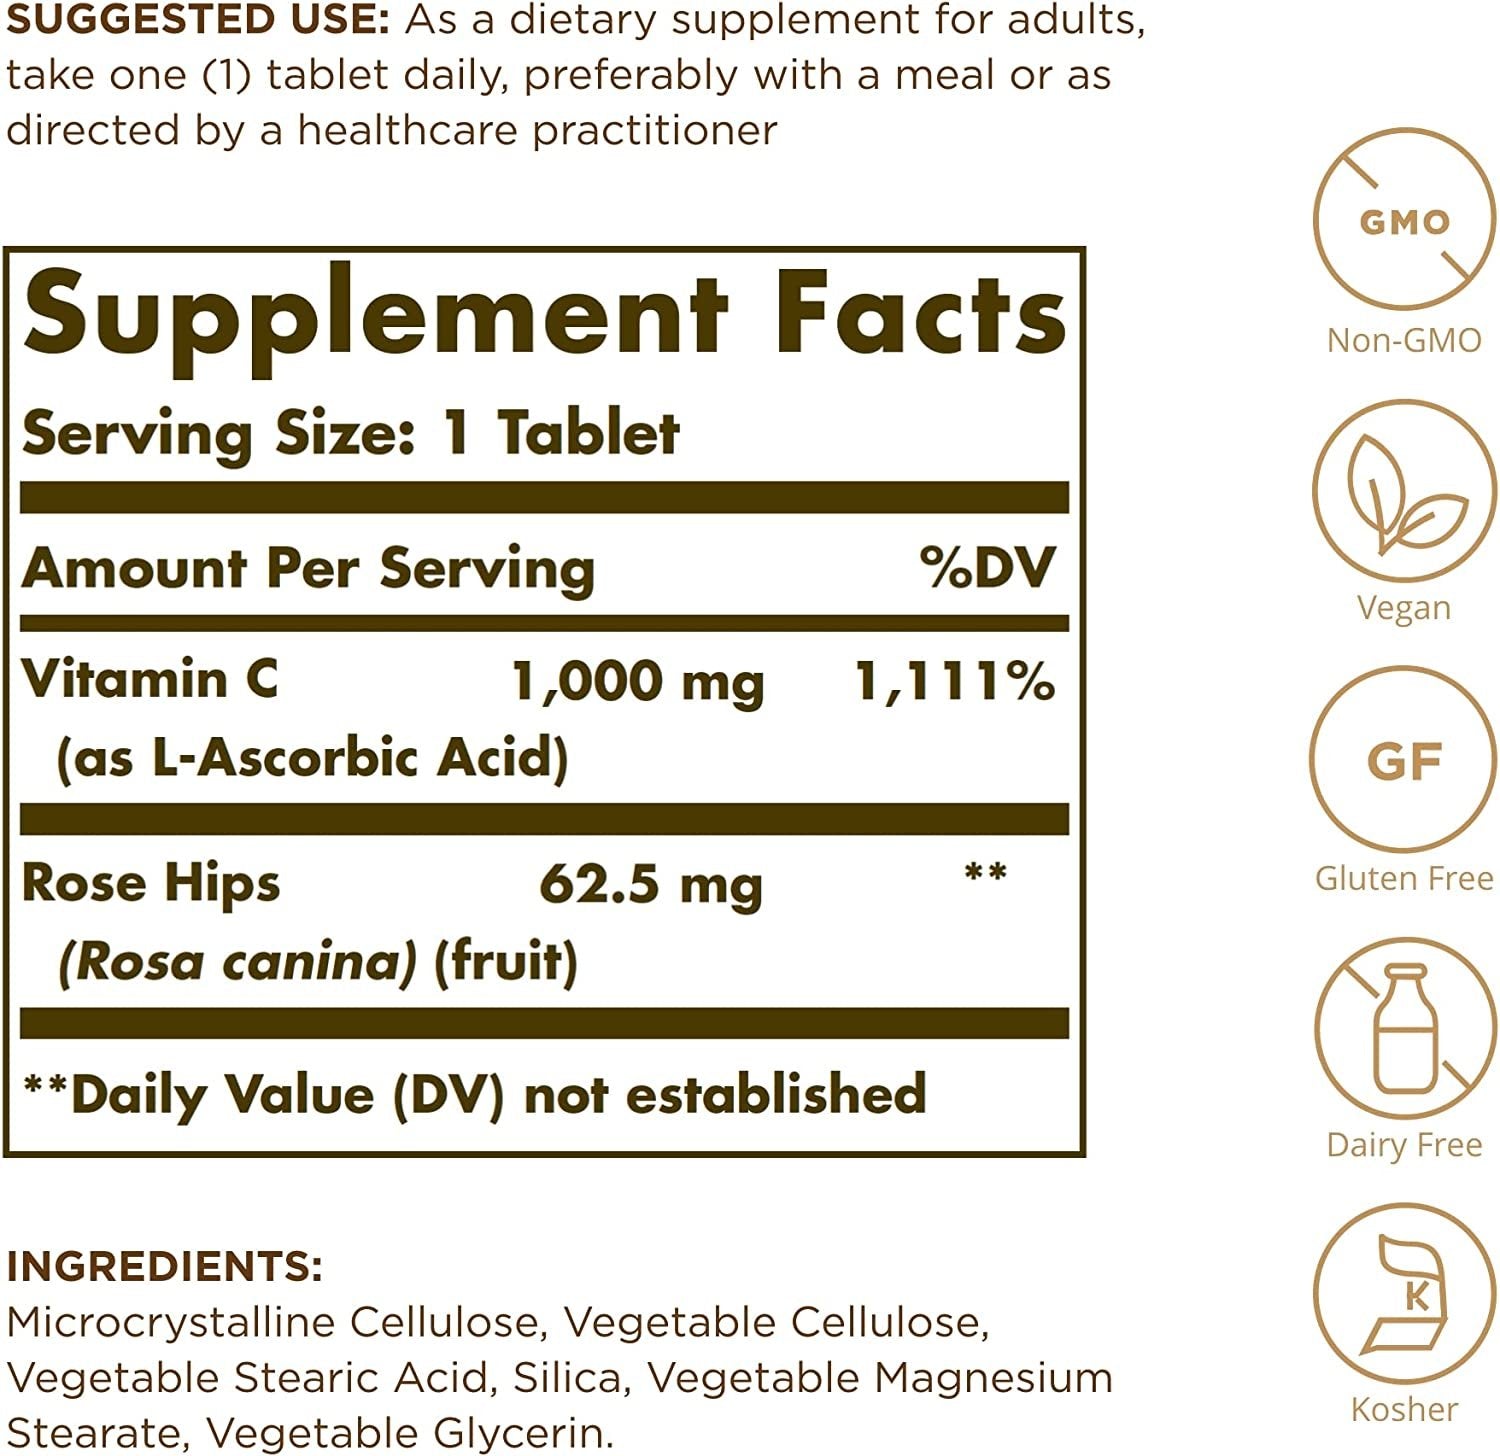 Solgar Vitamin C 1000 mg with Rose Hips - 100 Tablets, Pack of 2 - Antioxidant & Immune Support - Non GMO, Vegan, Gluten Free, Dairy Free, Kosher - 200 Total Servings